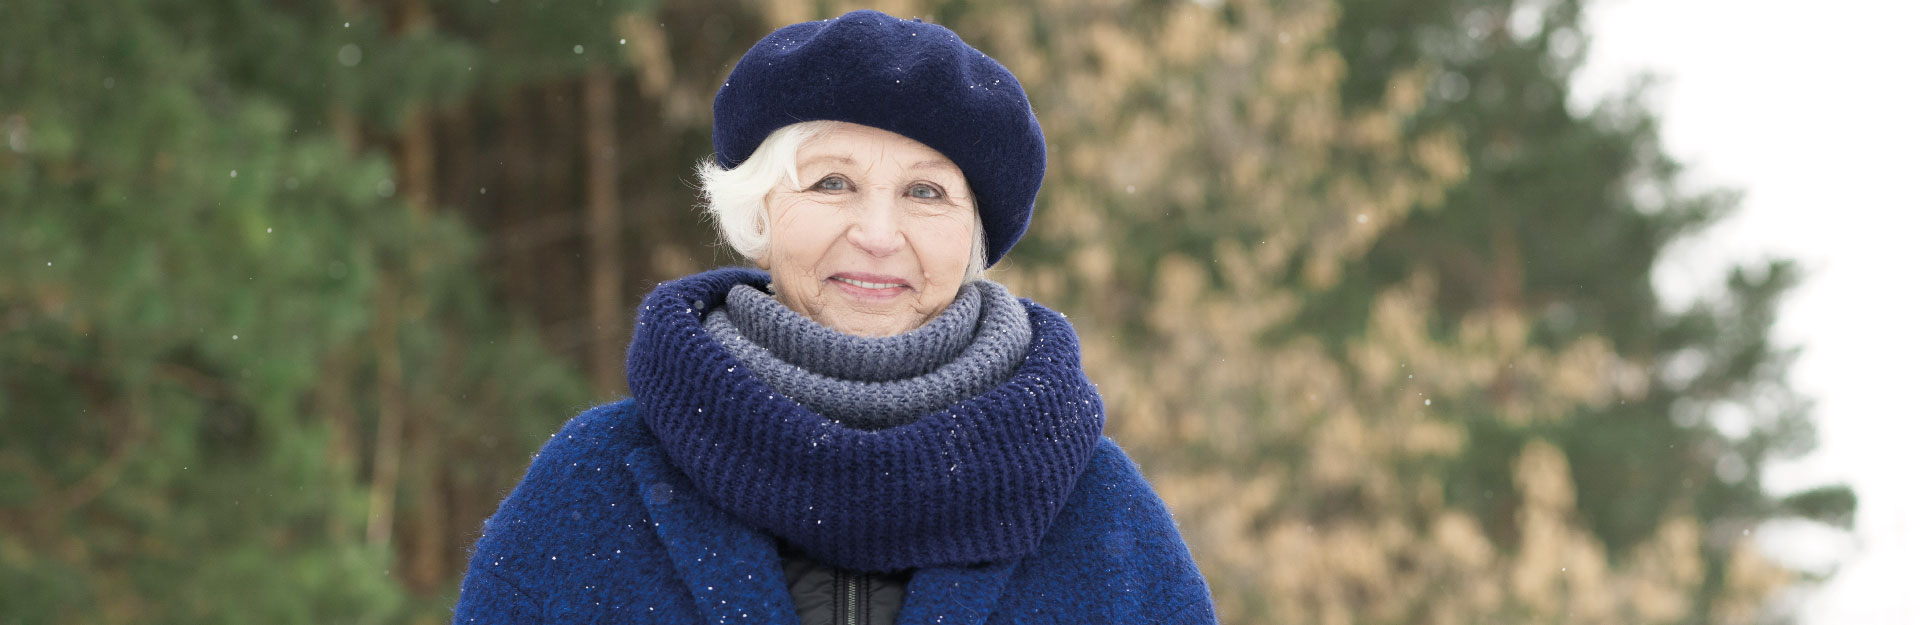 Elderly woman dressed warm in a hat, scarf and coat in cold, winter weather.